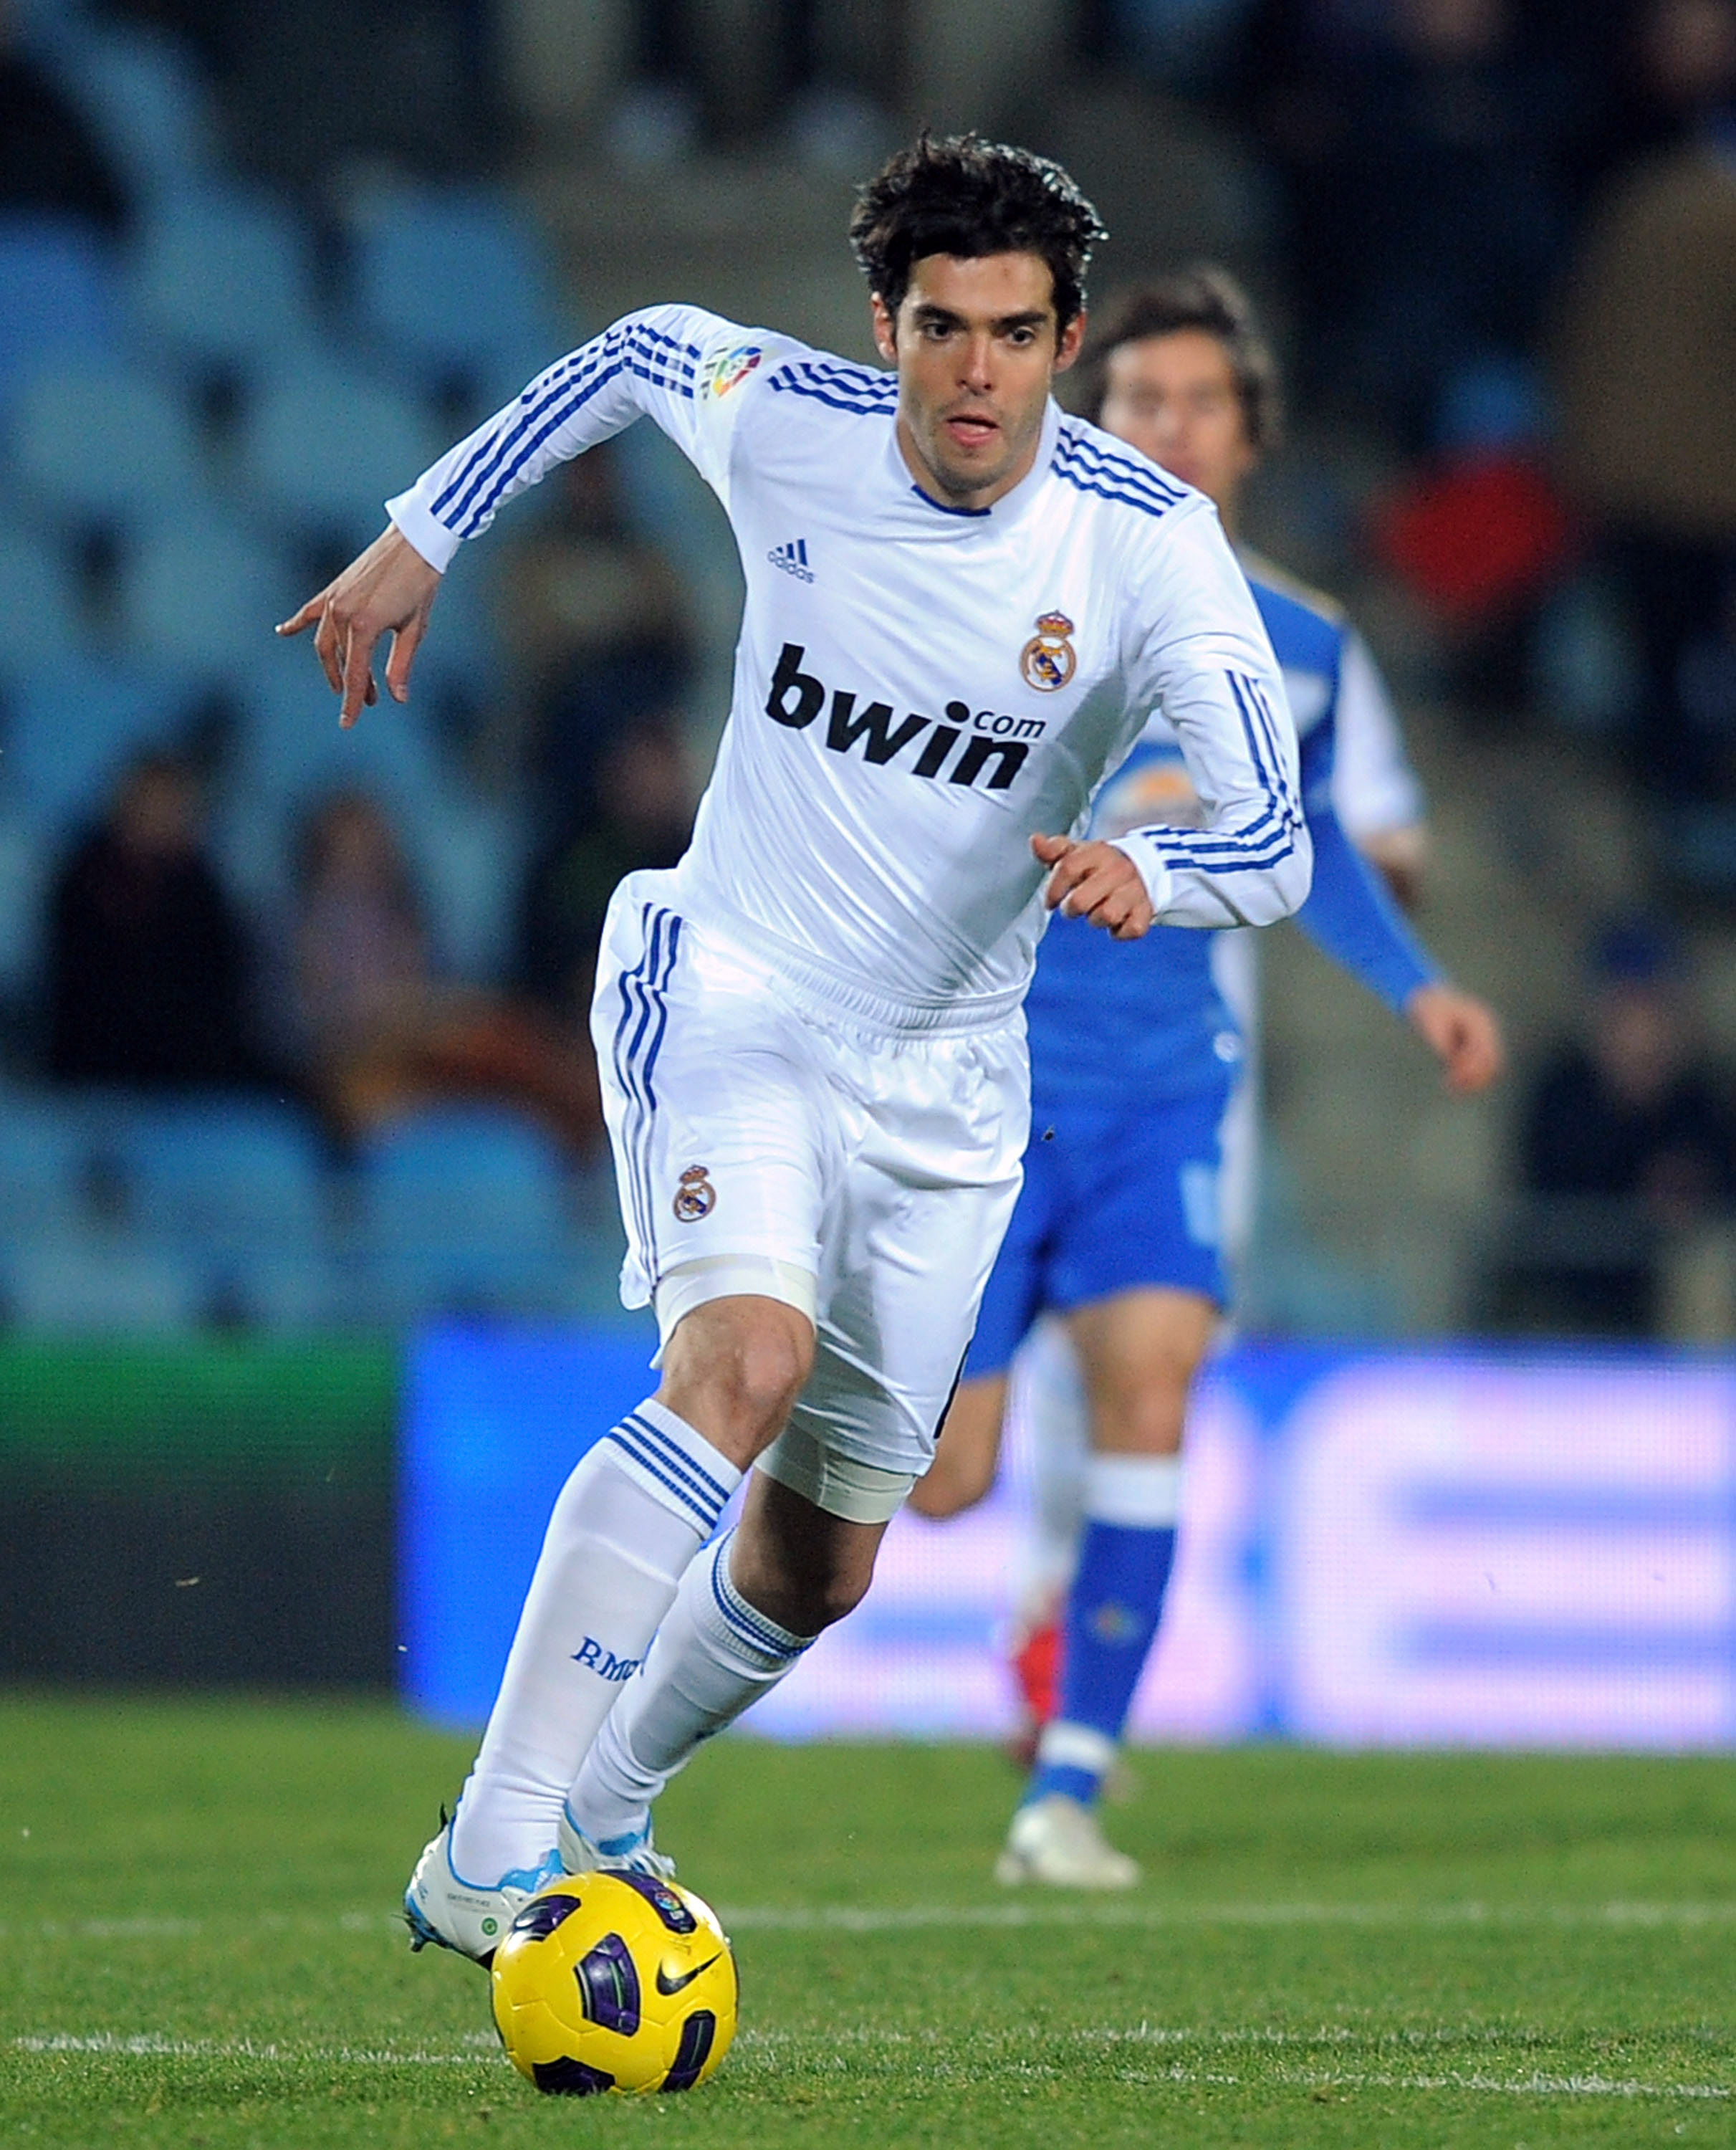 GETAFE, SPAIN - JANUARY 03:  Kaka of Real Madrid in action during the La Liga match between Getafe and Real Madrid at Coliseum Alfonso Perez stadium on January 3, 2011 in Getafe, Spain.  (Photo by Denis Doyle/Getty Images)